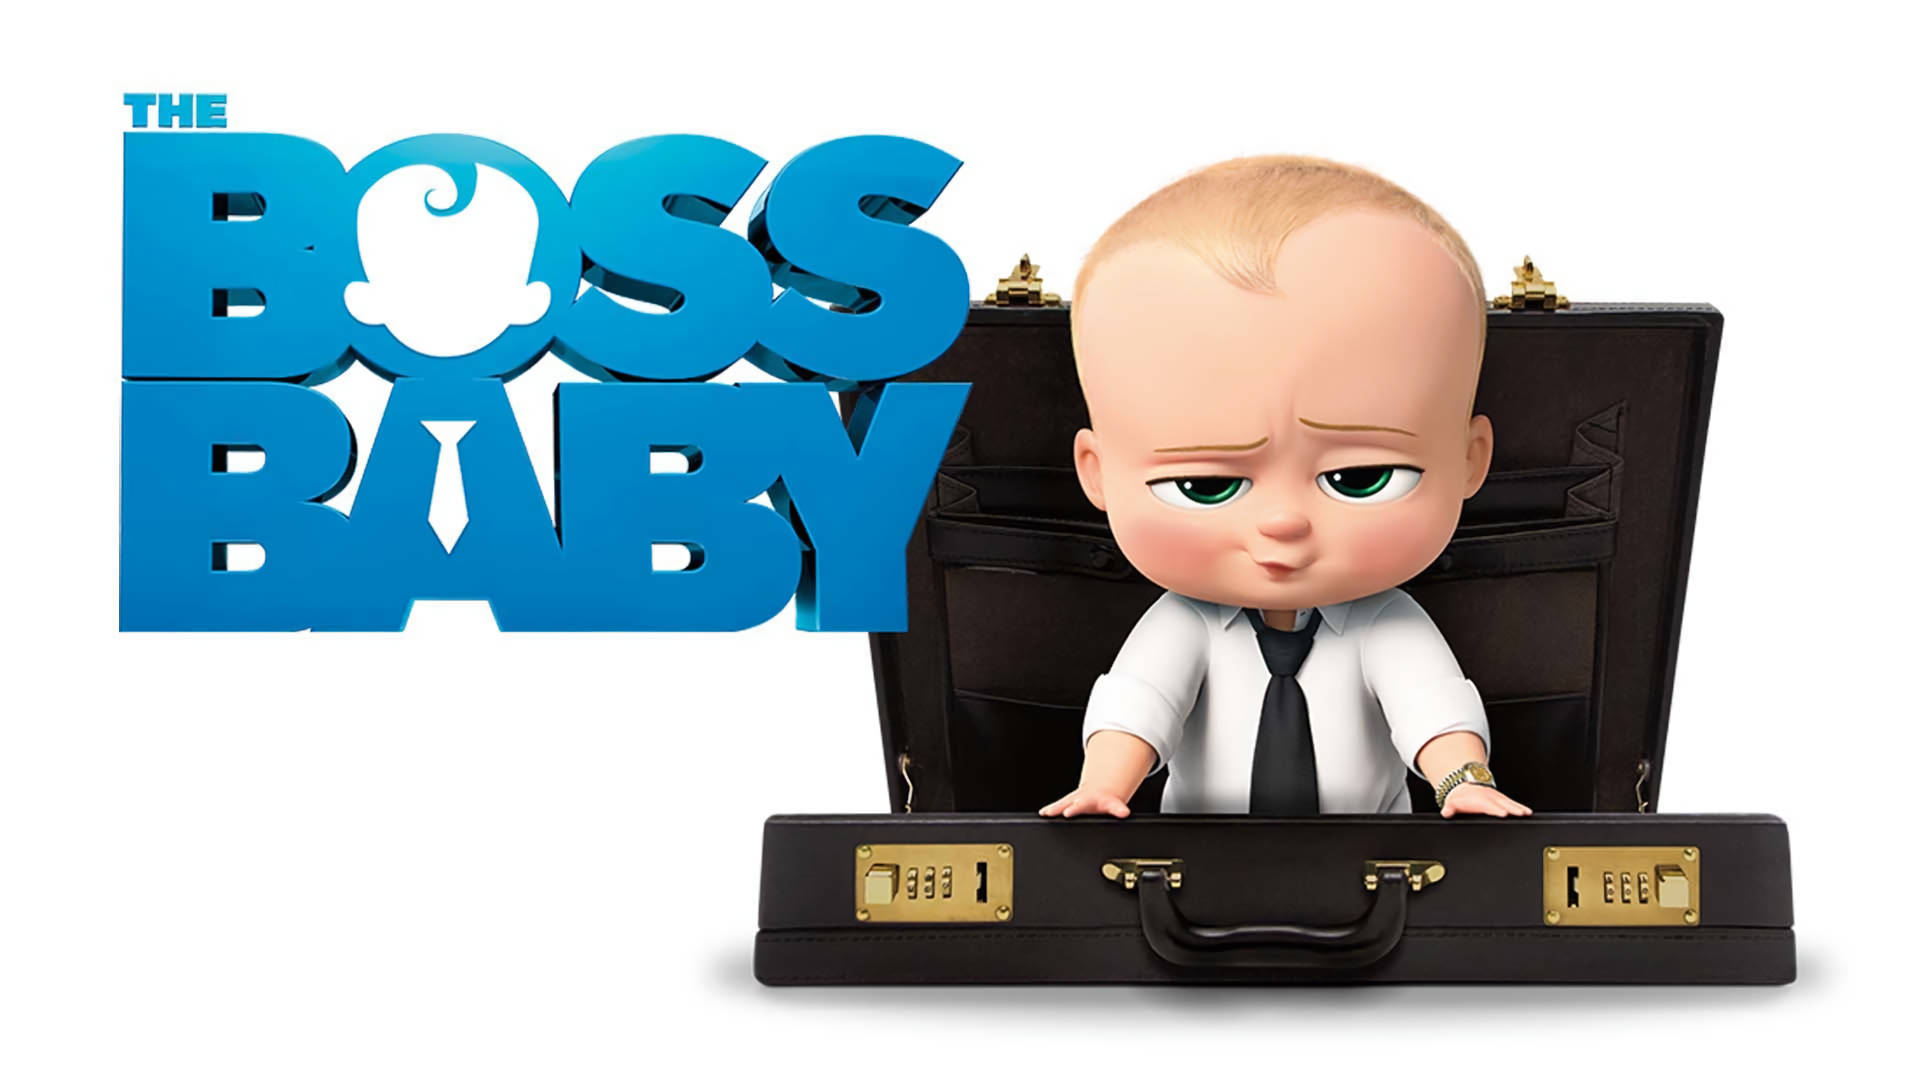 The Boss Baby In Briefcase